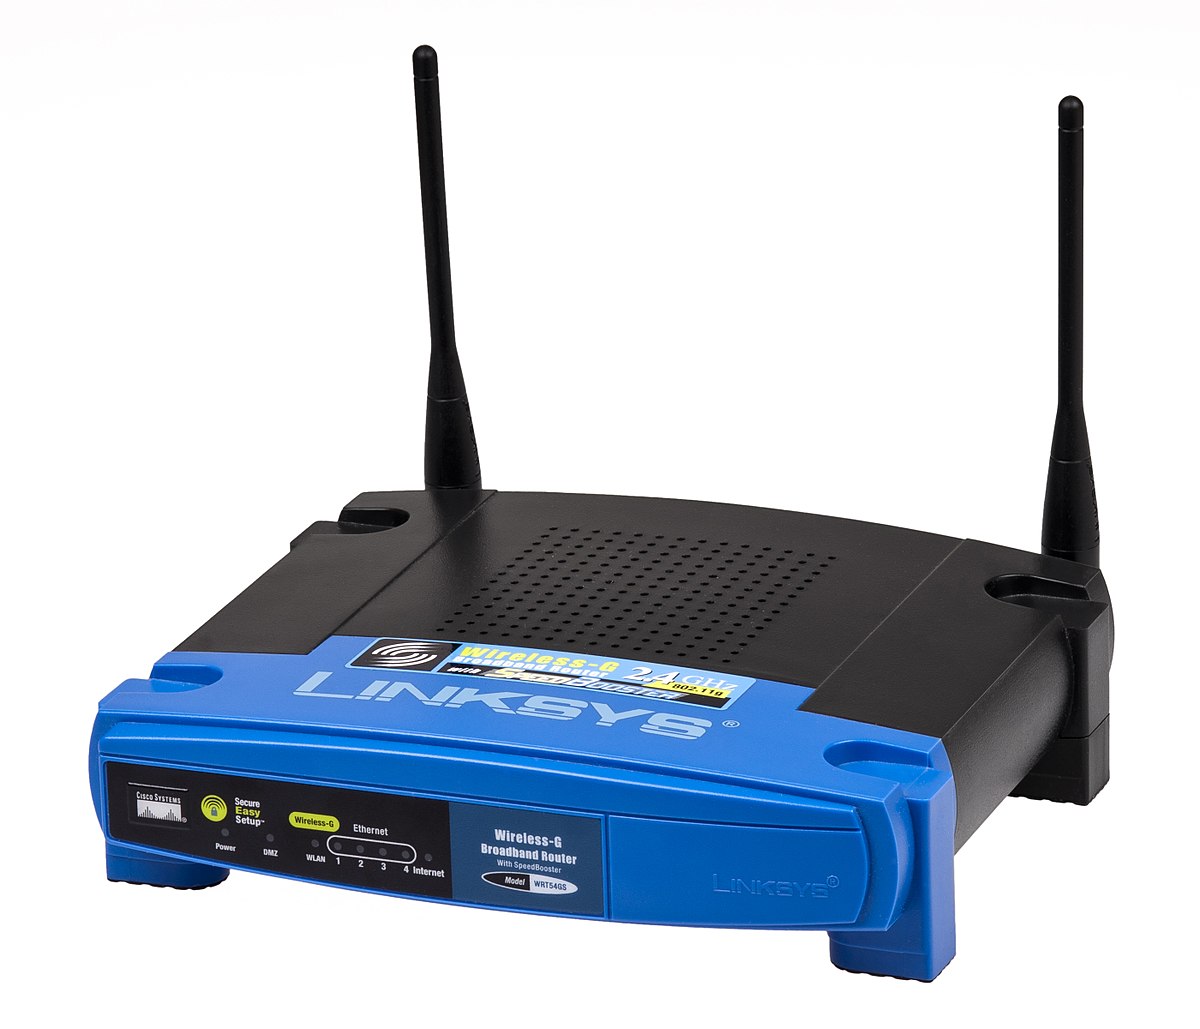 Keep the router away from devices that may cause interference (microwaves, cordless phones, etc.)
Minimize the number of devices connected to the Wi-Fi network